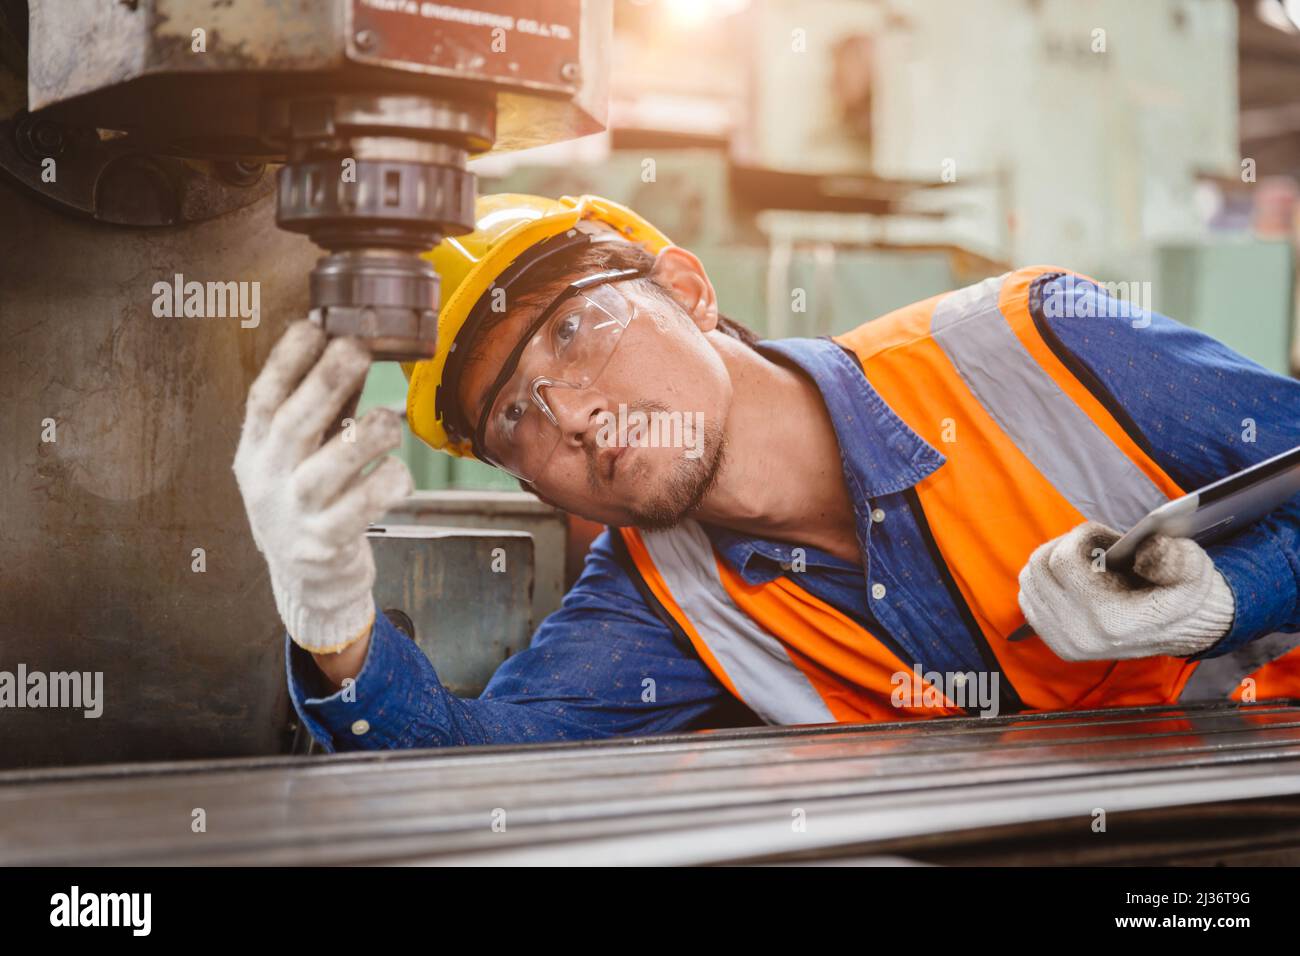 Engineer staff worker setup check condition drill head of CNC machine for safety in metal industry workplace. Stock Photo